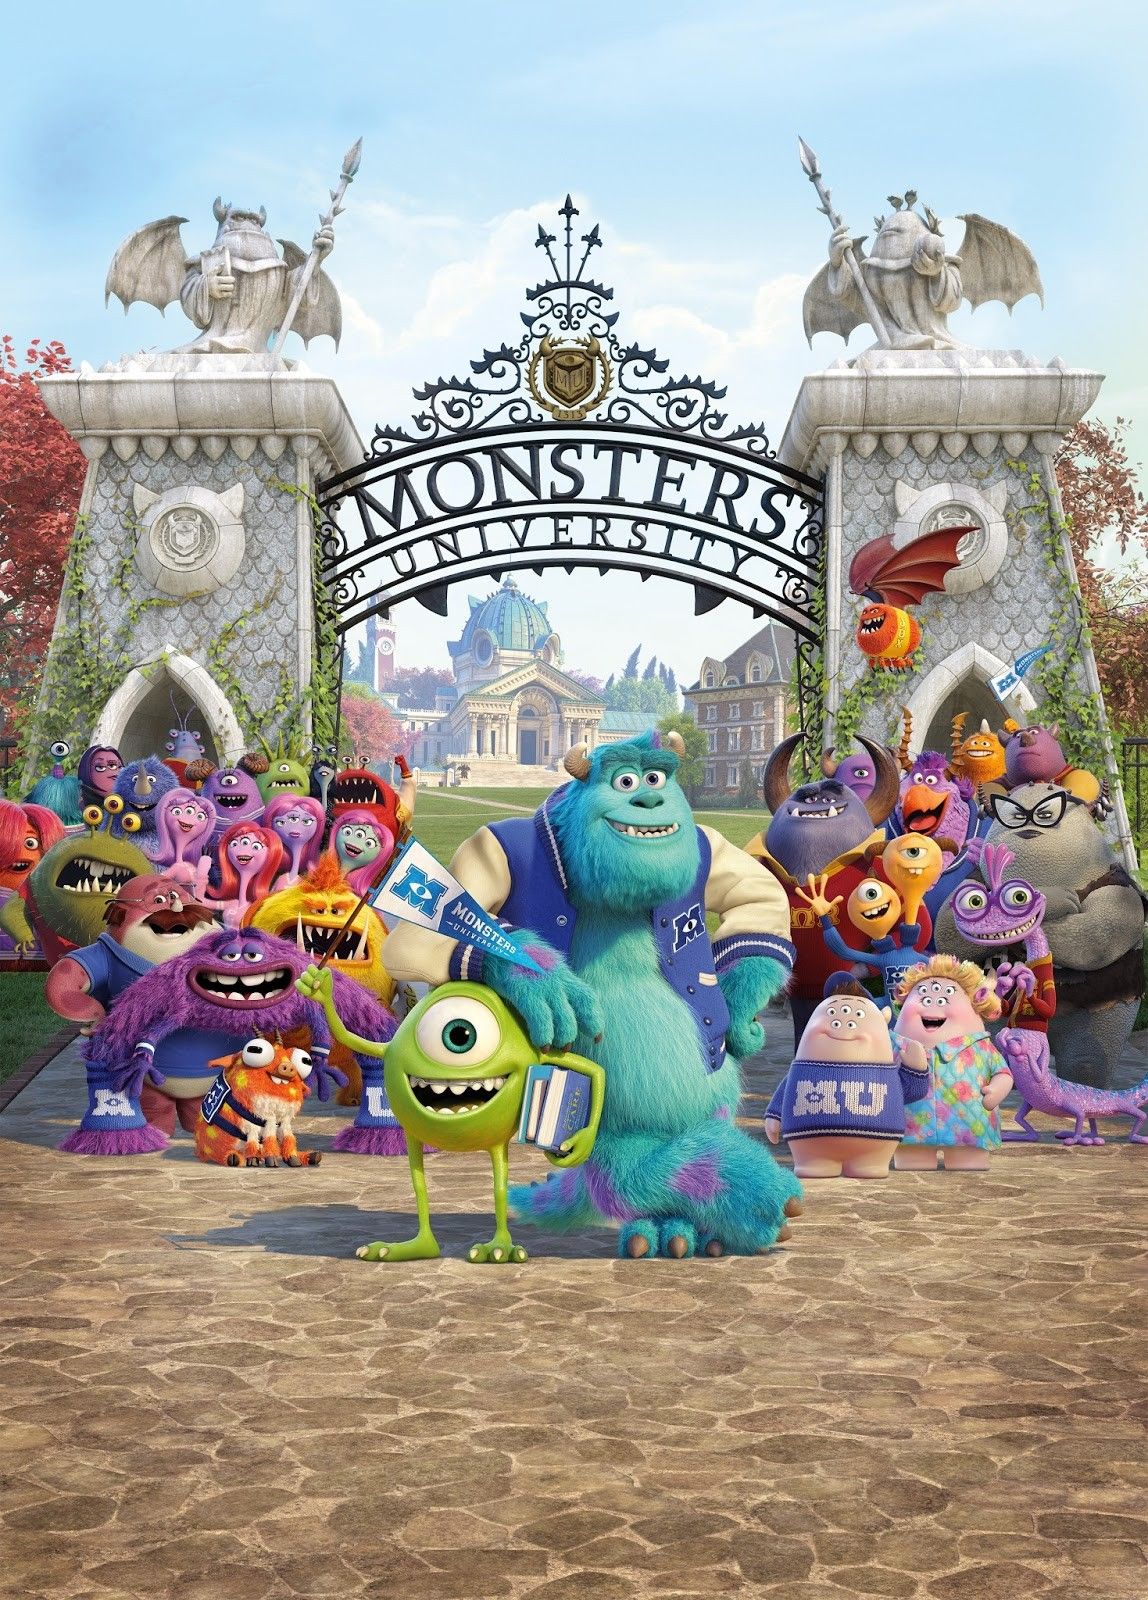 James P. Sullivan, Mike Wazowski and friends from Walt Disney Pictures' Monsters University (2013)